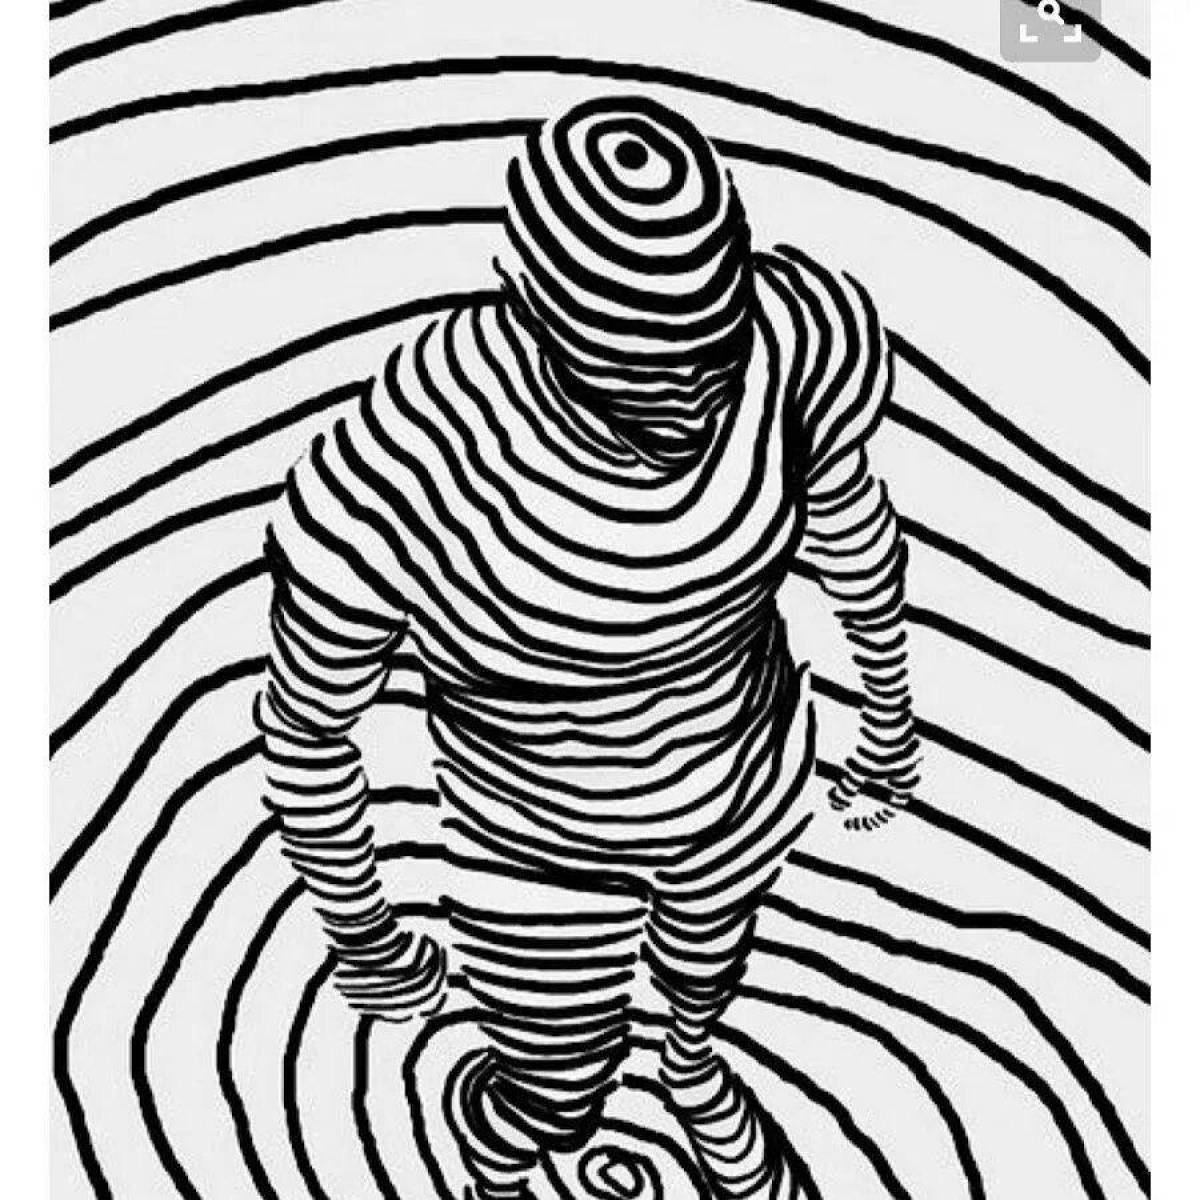 Coloring page charming spiral improvisation